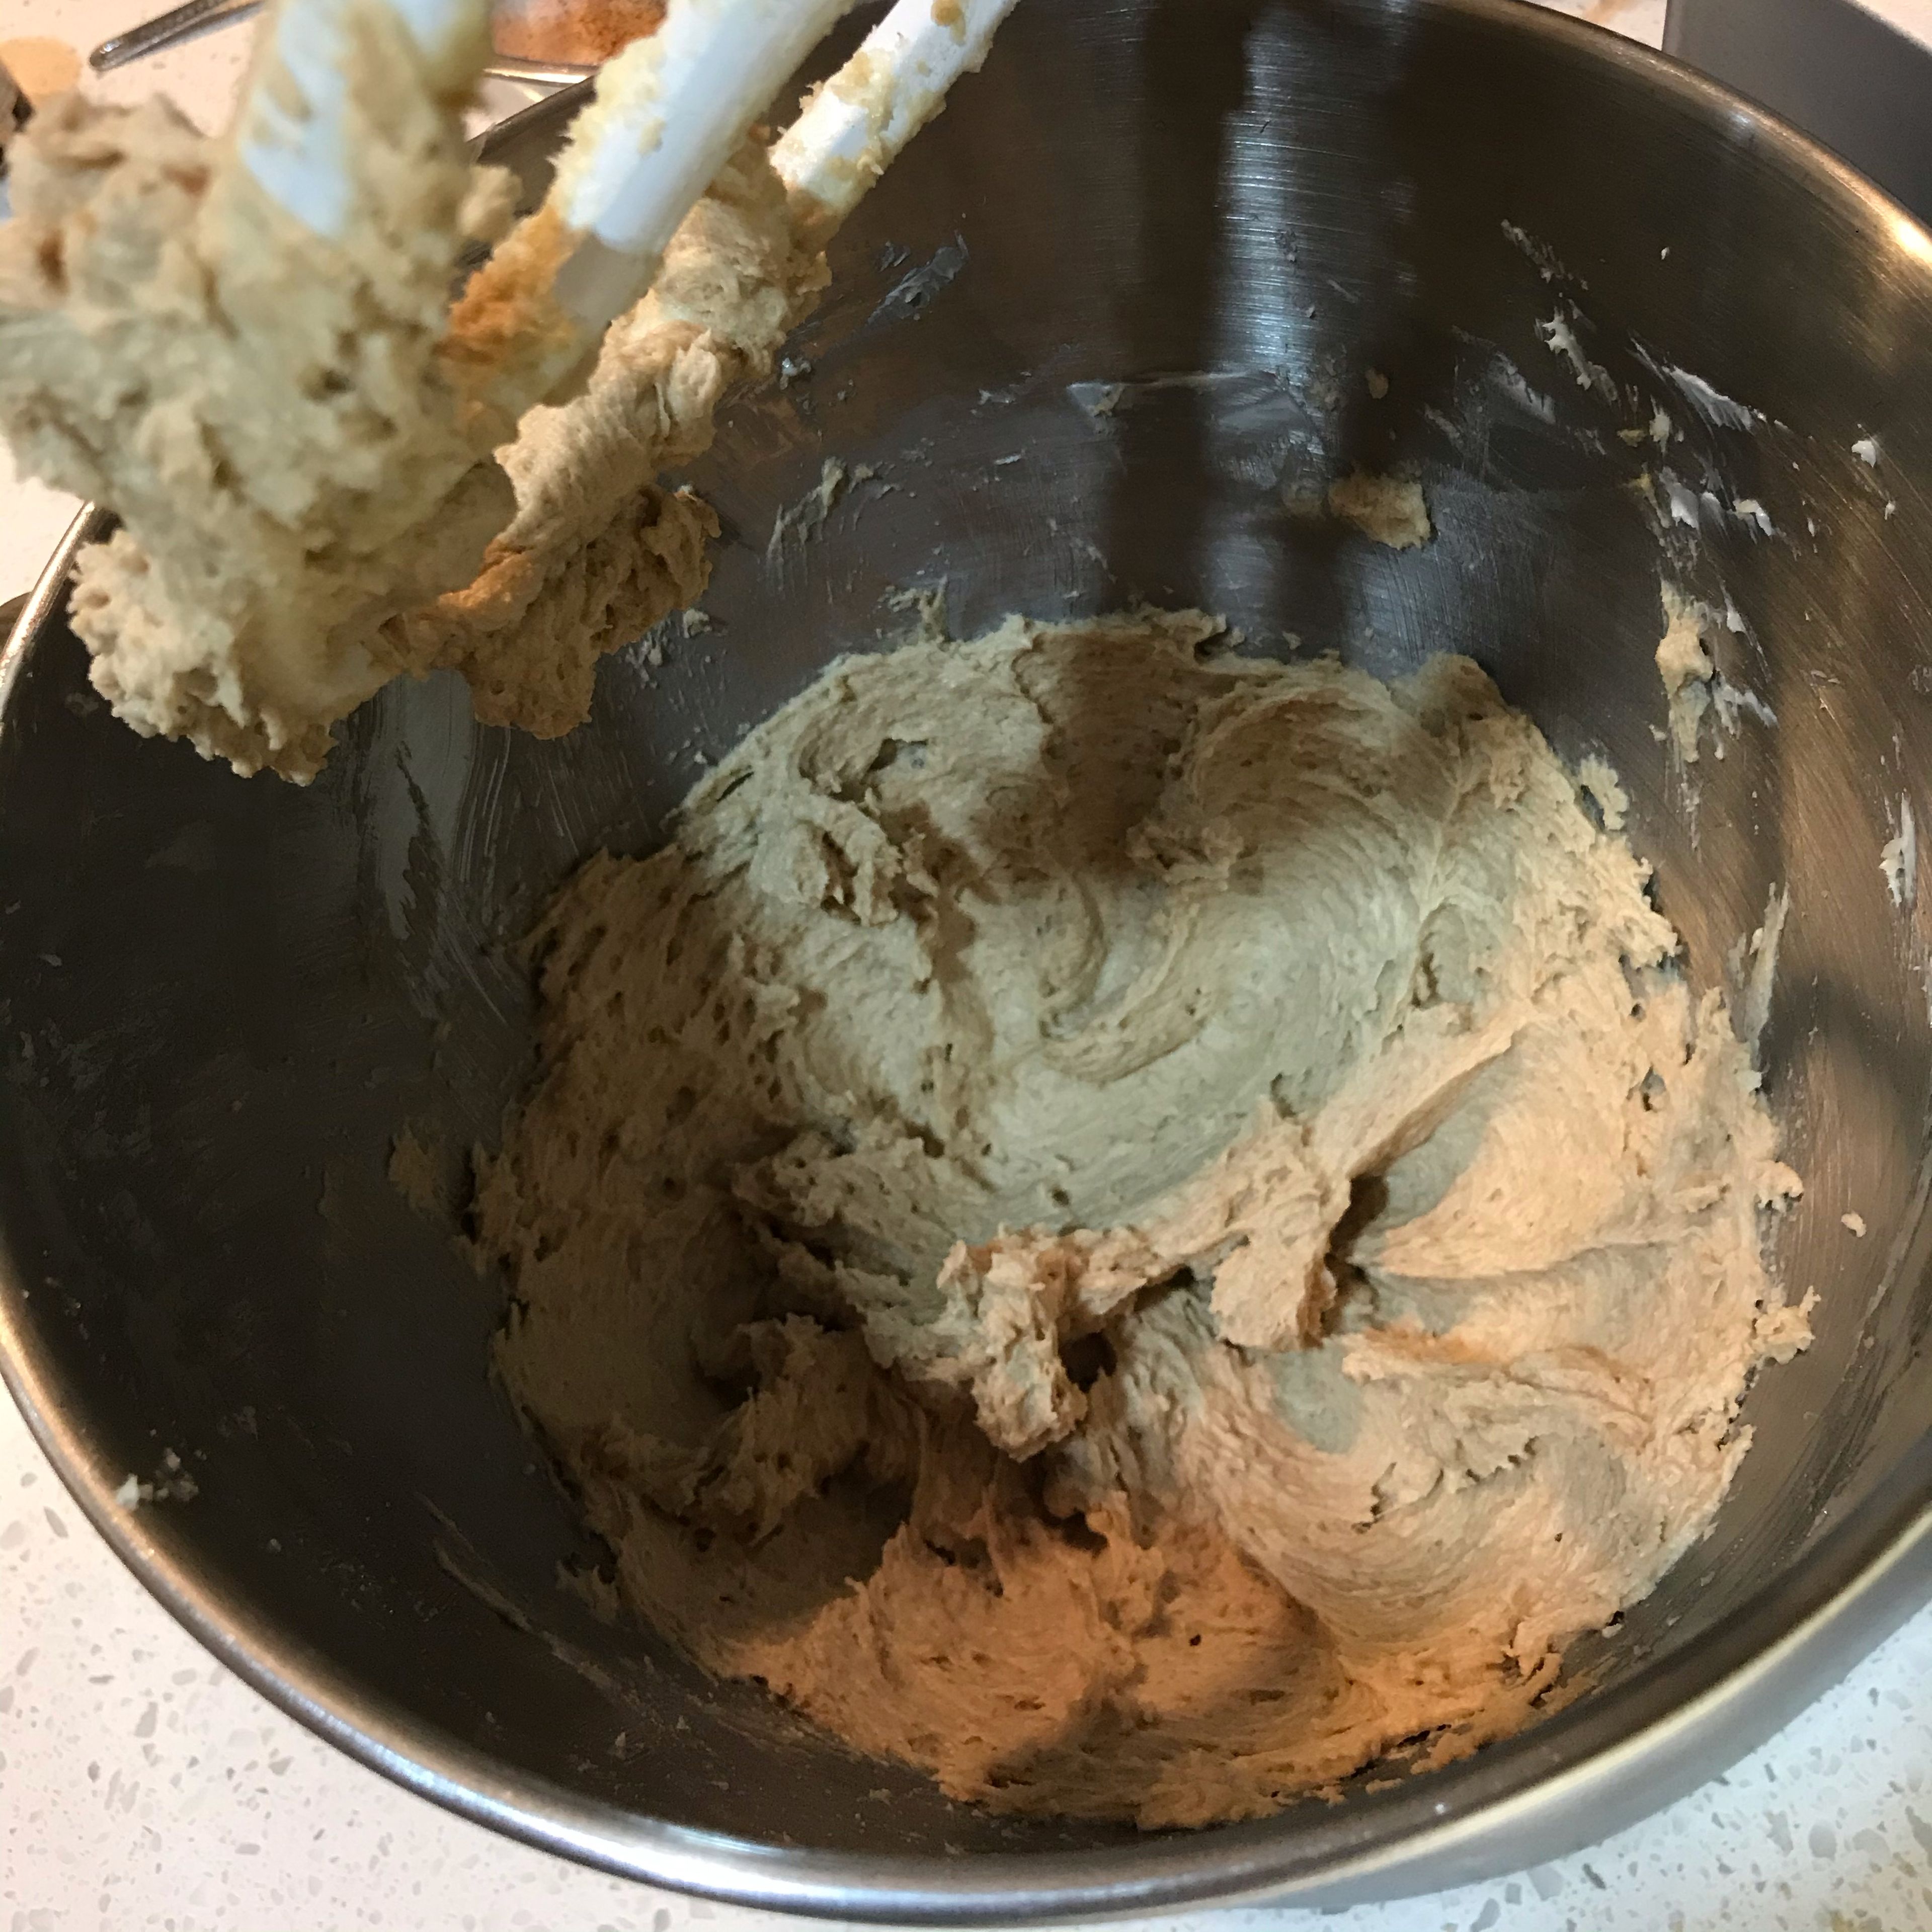 Slowly add the two types of sugar and salt into the creamed butter & ginger while mixing on low speed. Once combined, scrape down the sides of the bowl, then mix on medium speed for 4 minutes, until light and fluffy. If you are using table salt instead of kosher salt, use half the amount of salt.